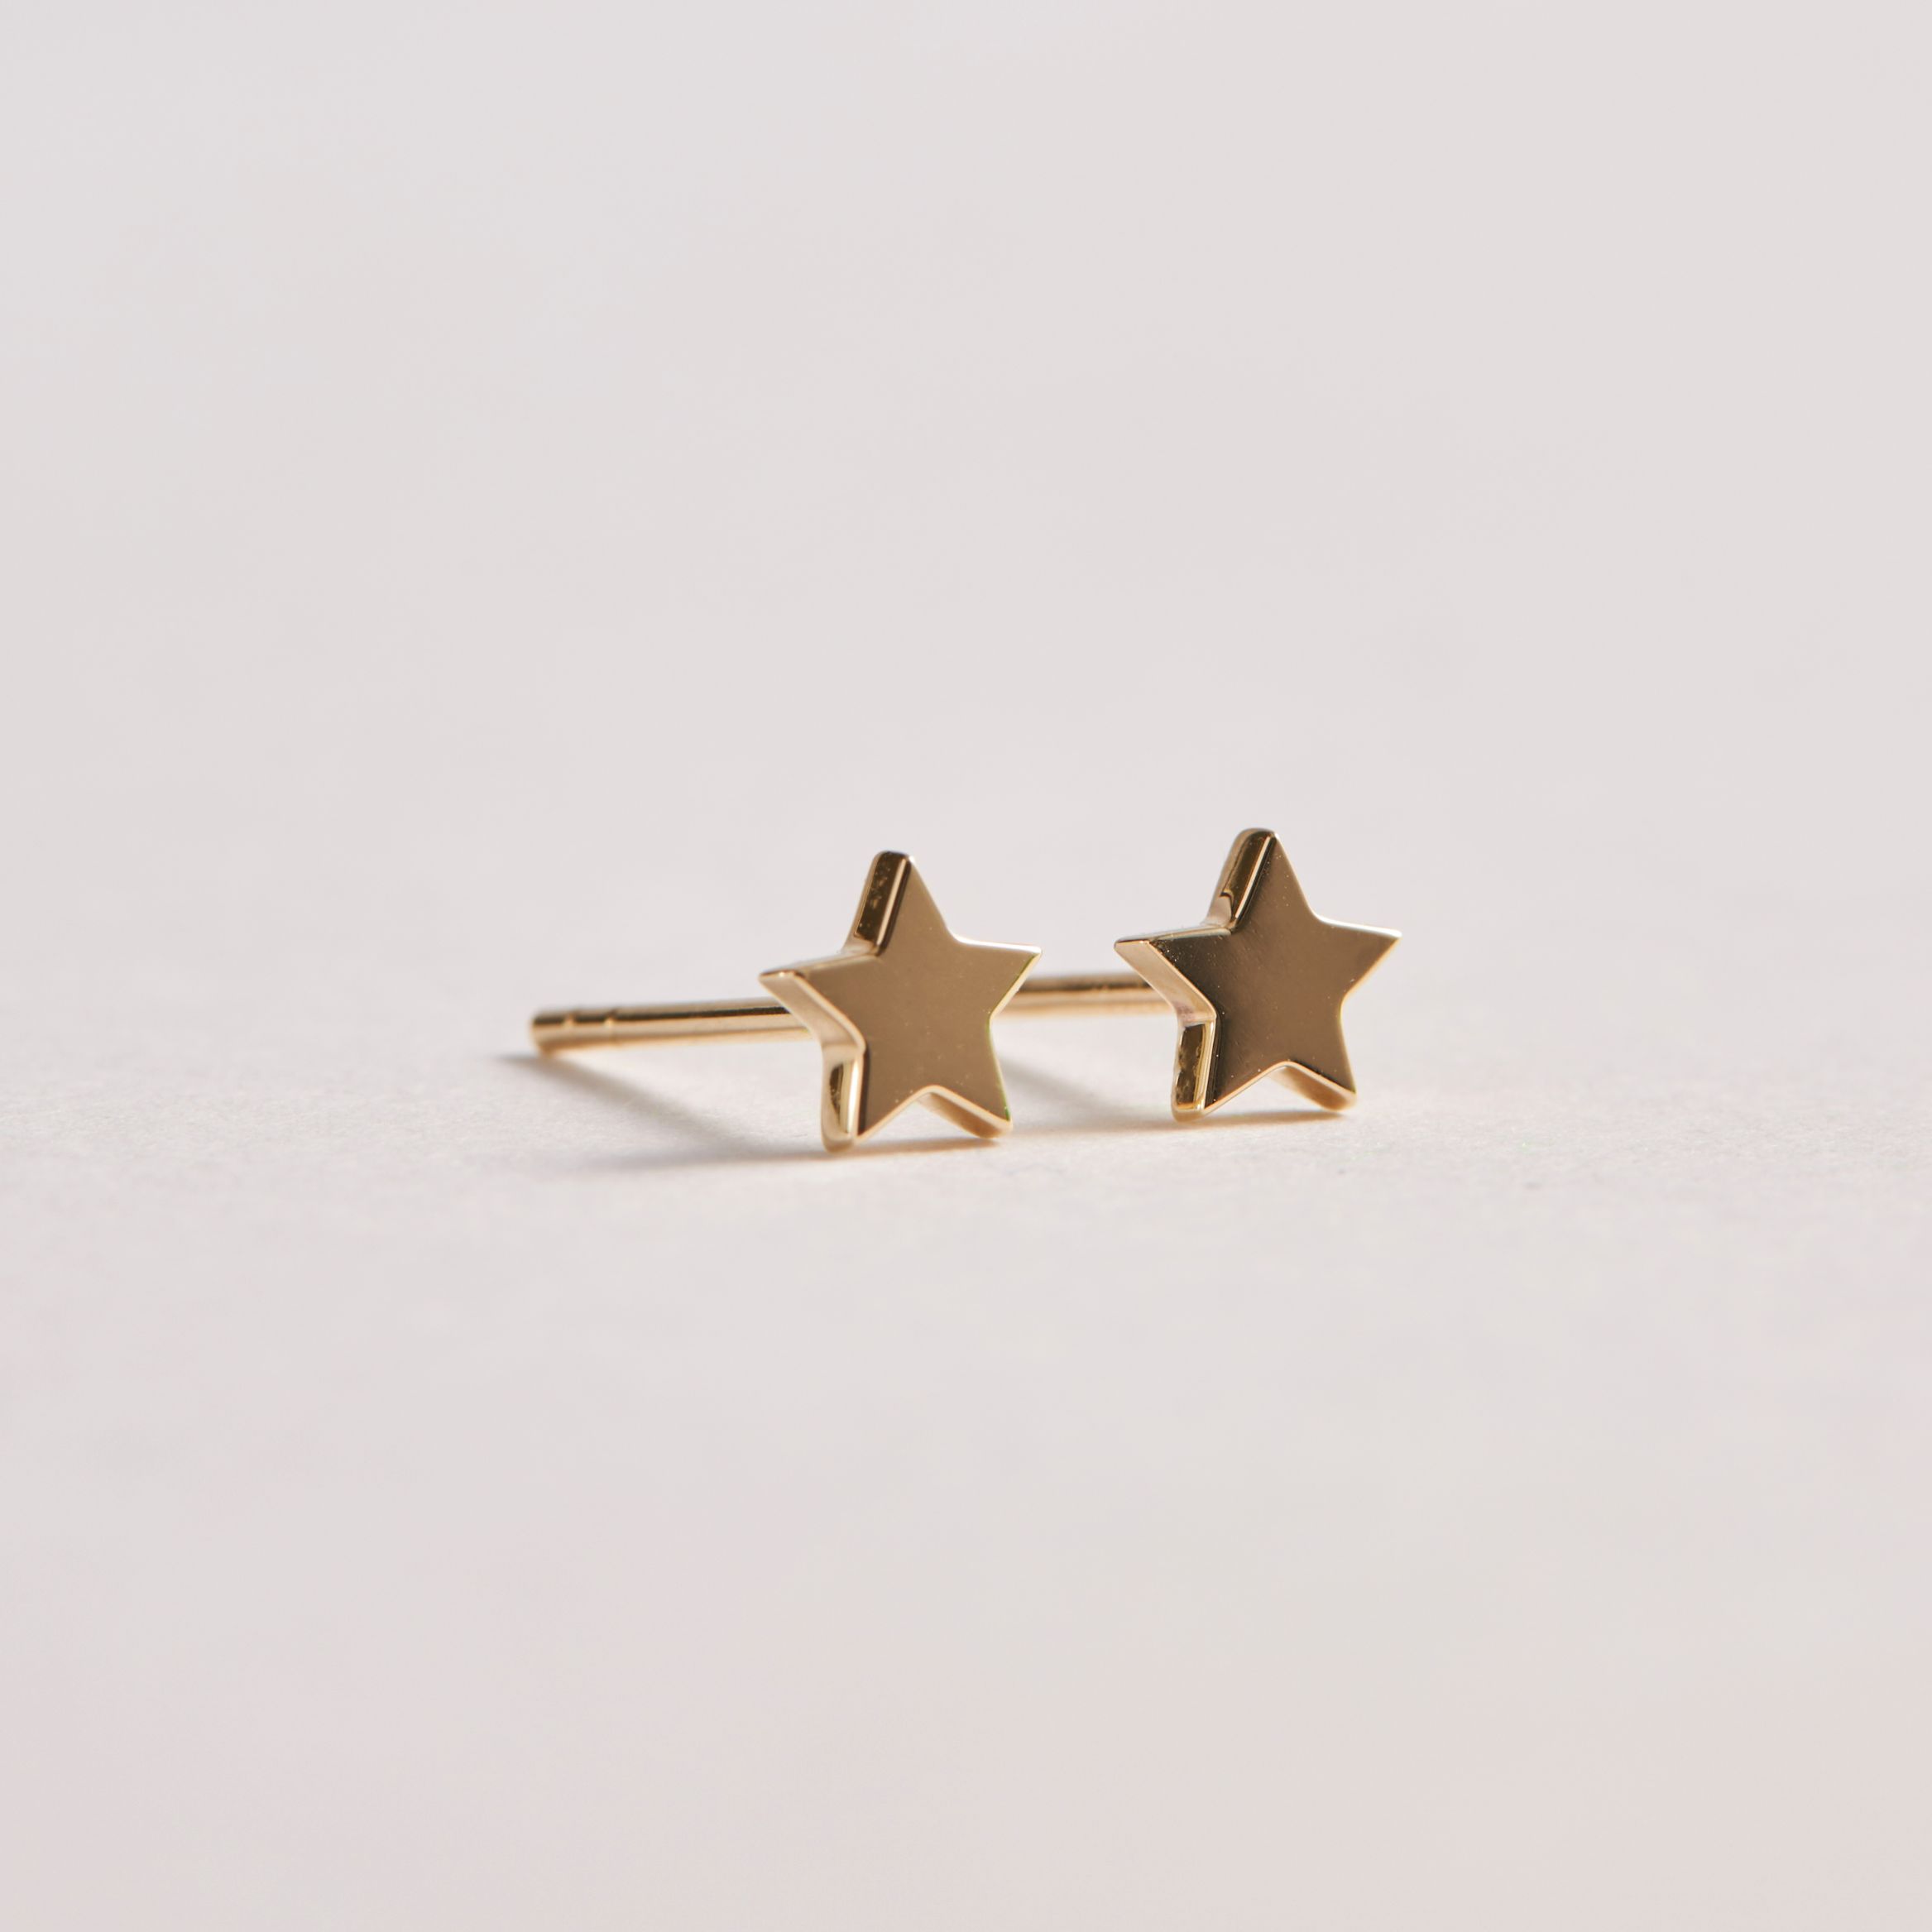 NAMIBIA REAL GOLD STAR STUDS